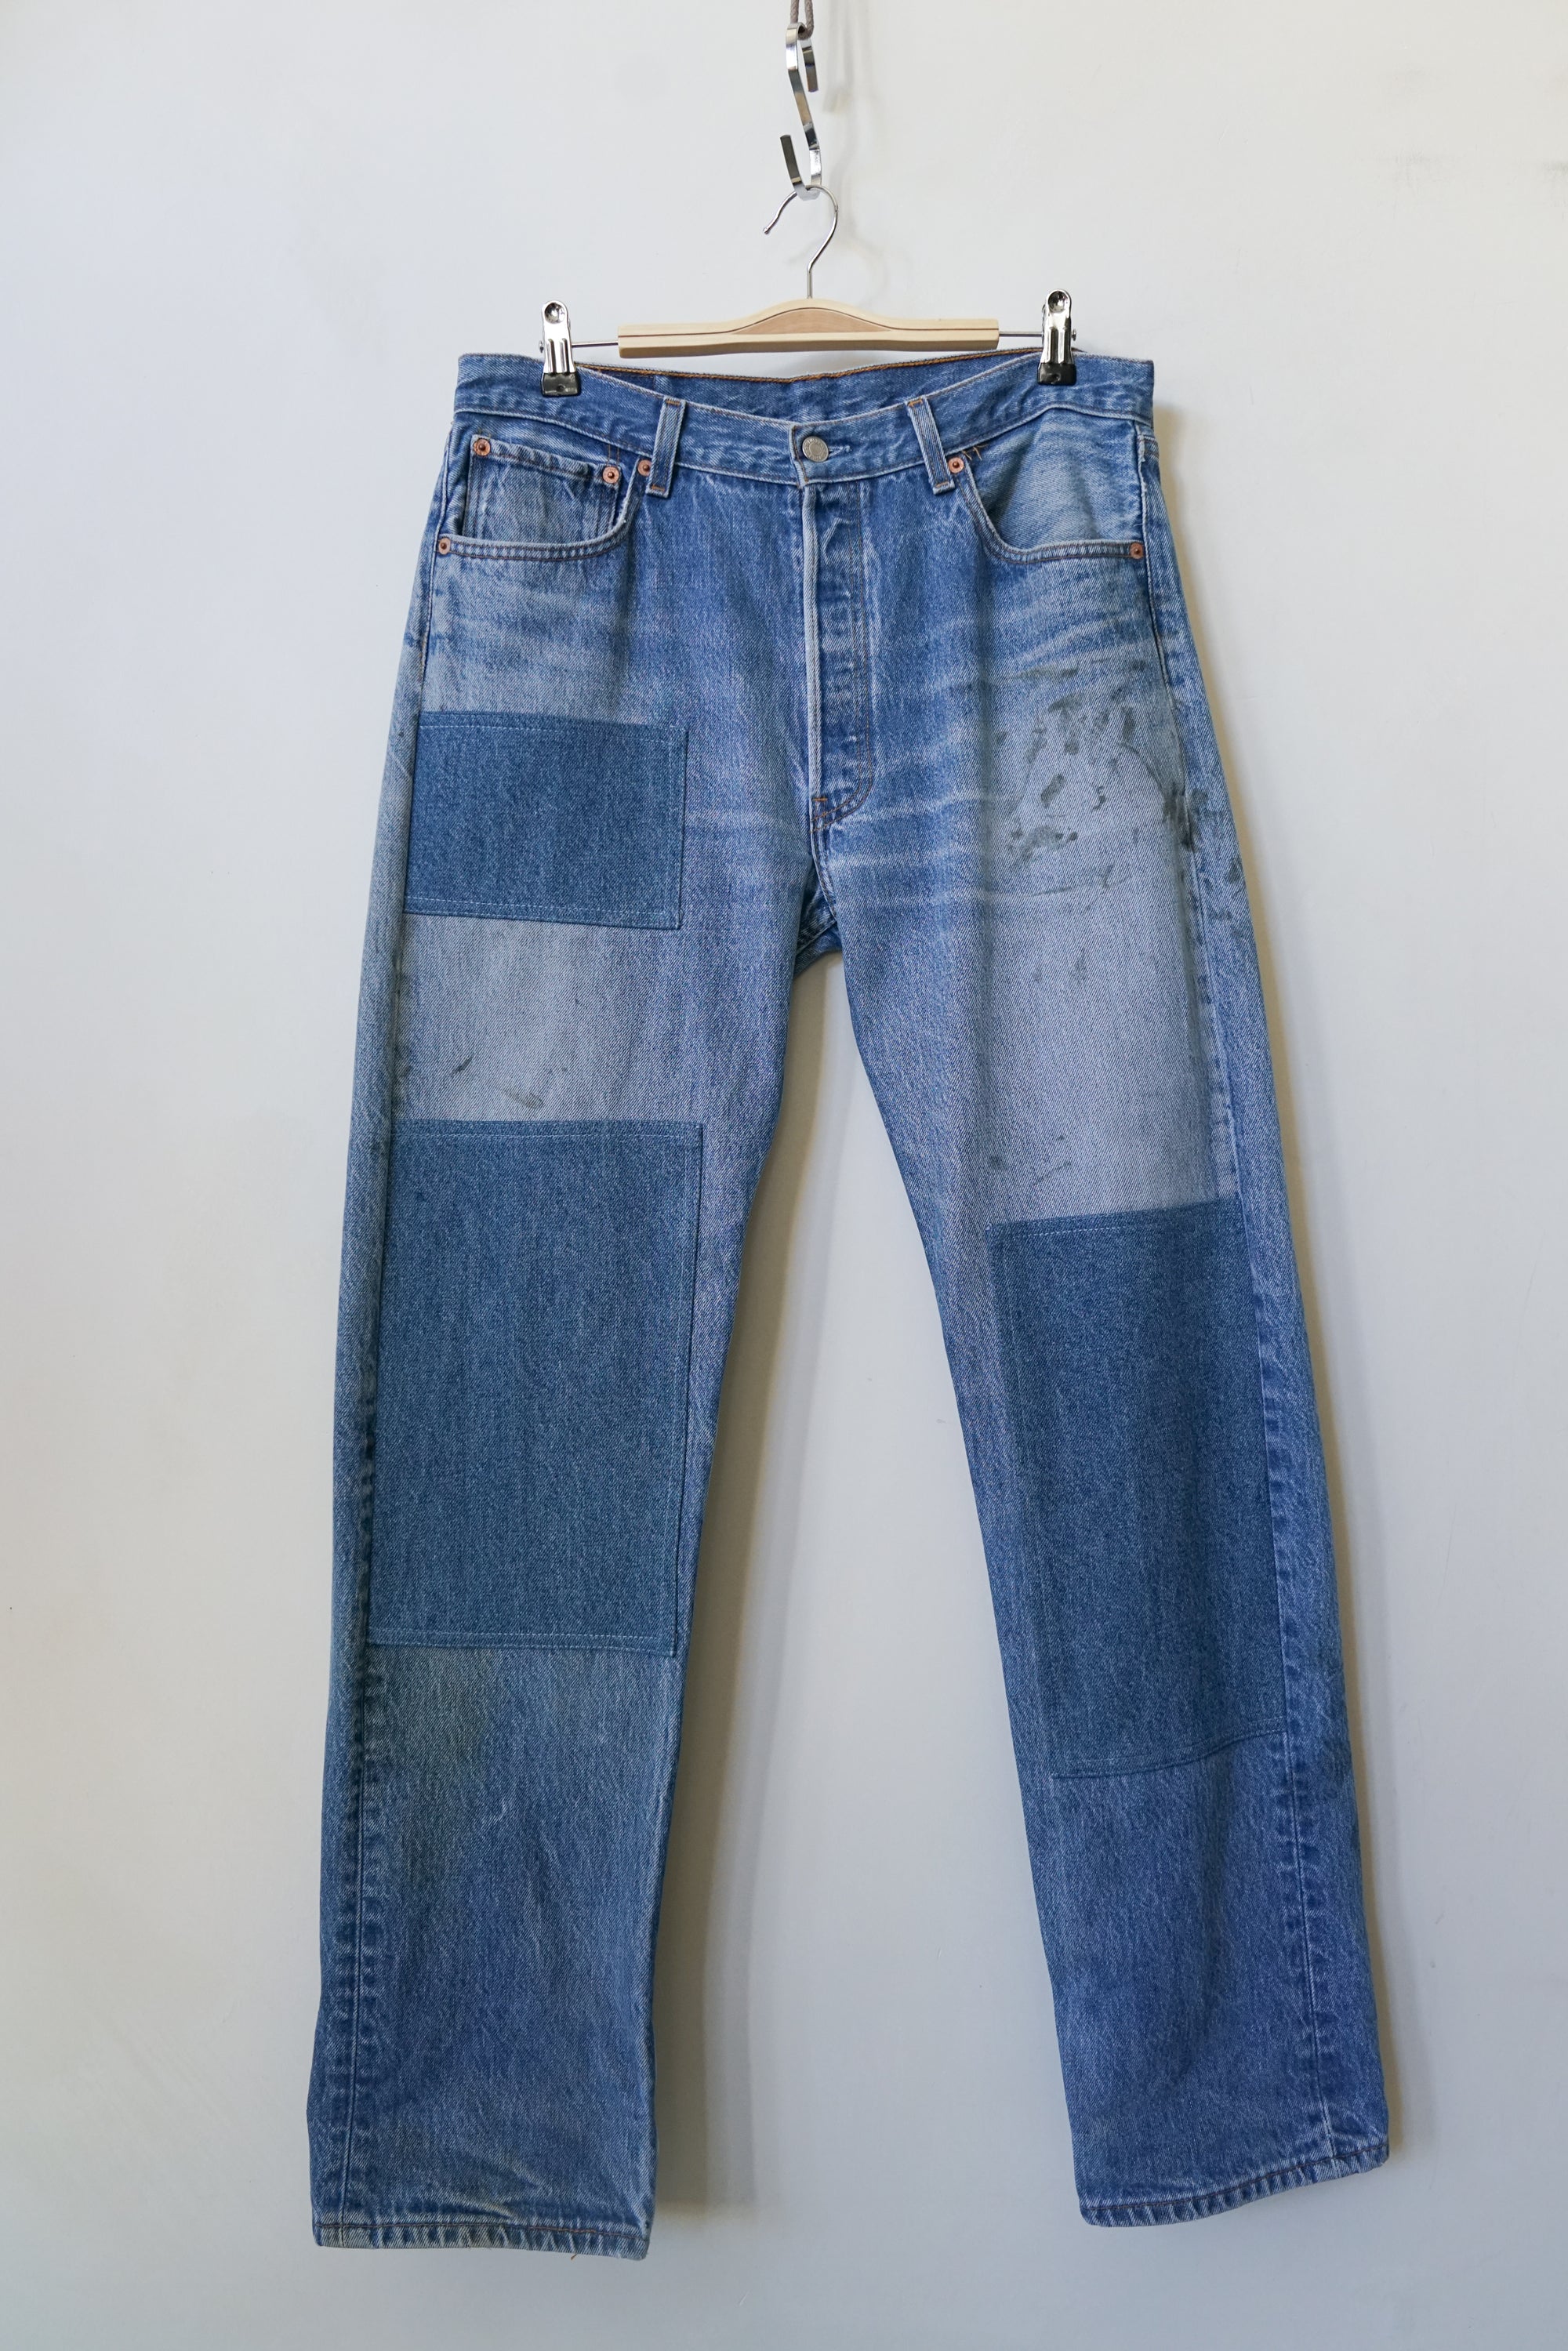 Repaired Vintage Levis 501 33W